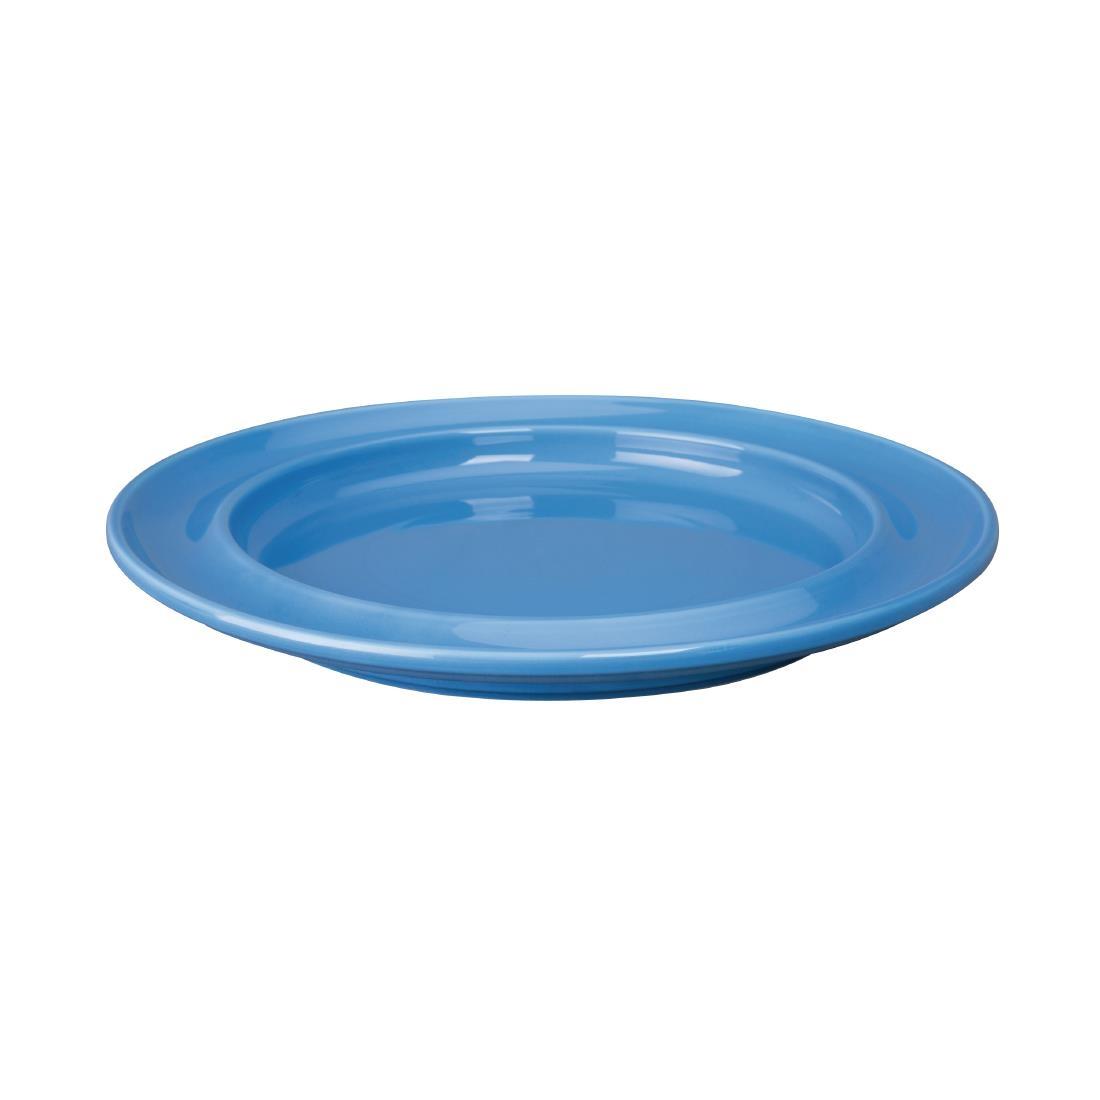 Olympia Heritage Raised Rim Plates Blue 253mm (Pack of 4) - DW141  - 2